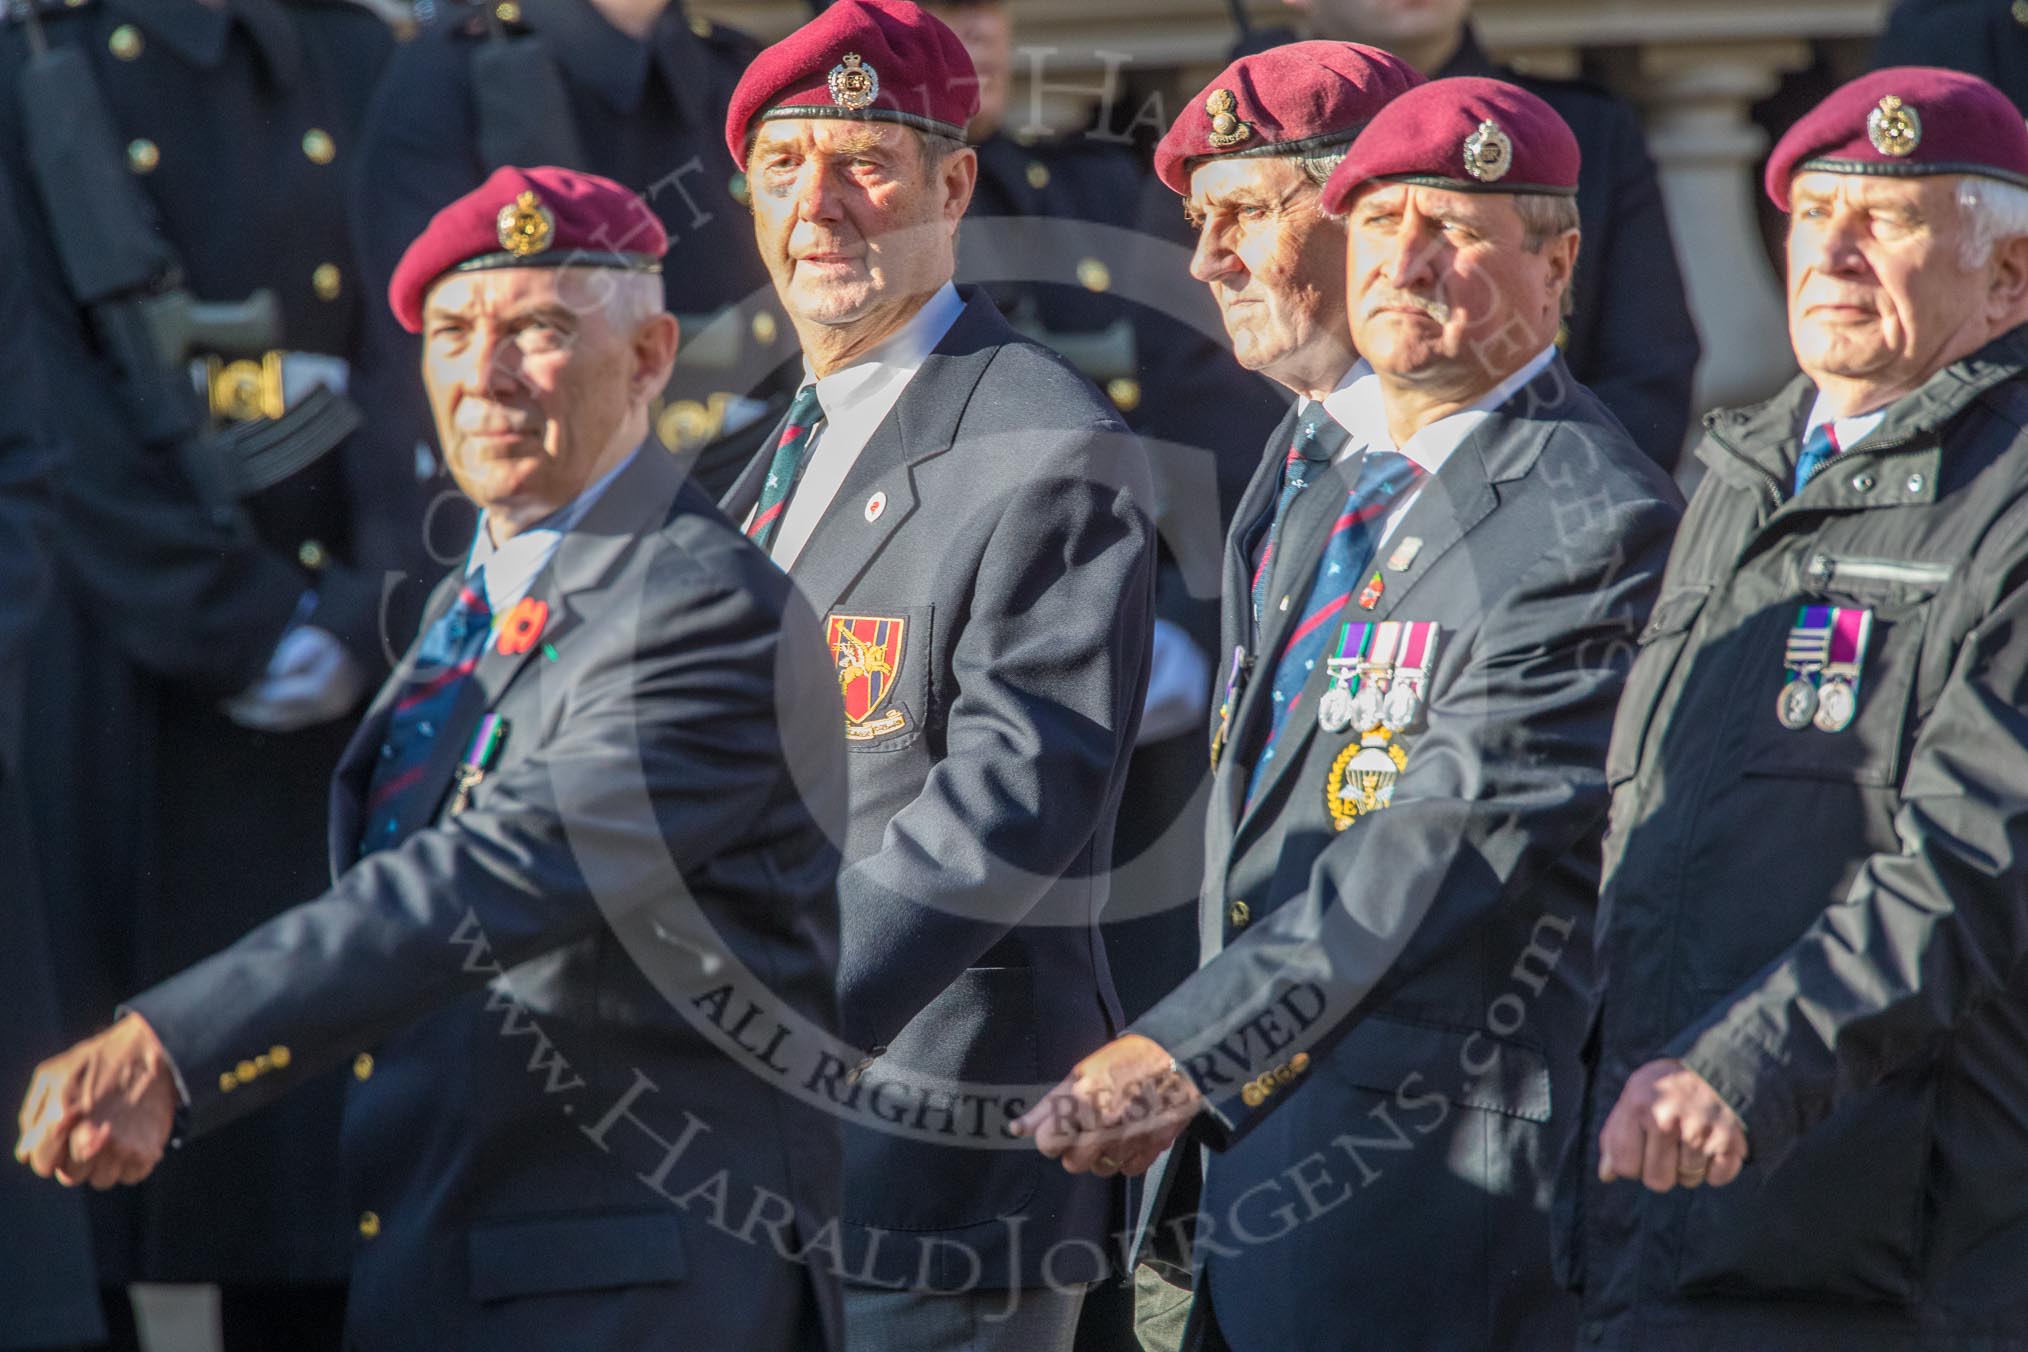 Airborne Engineers Association (Group B31, 20 members) during the Royal British Legion March Past on Remembrance Sunday at the Cenotaph, Whitehall, Westminster, London, 11 November 2018, 12:12.